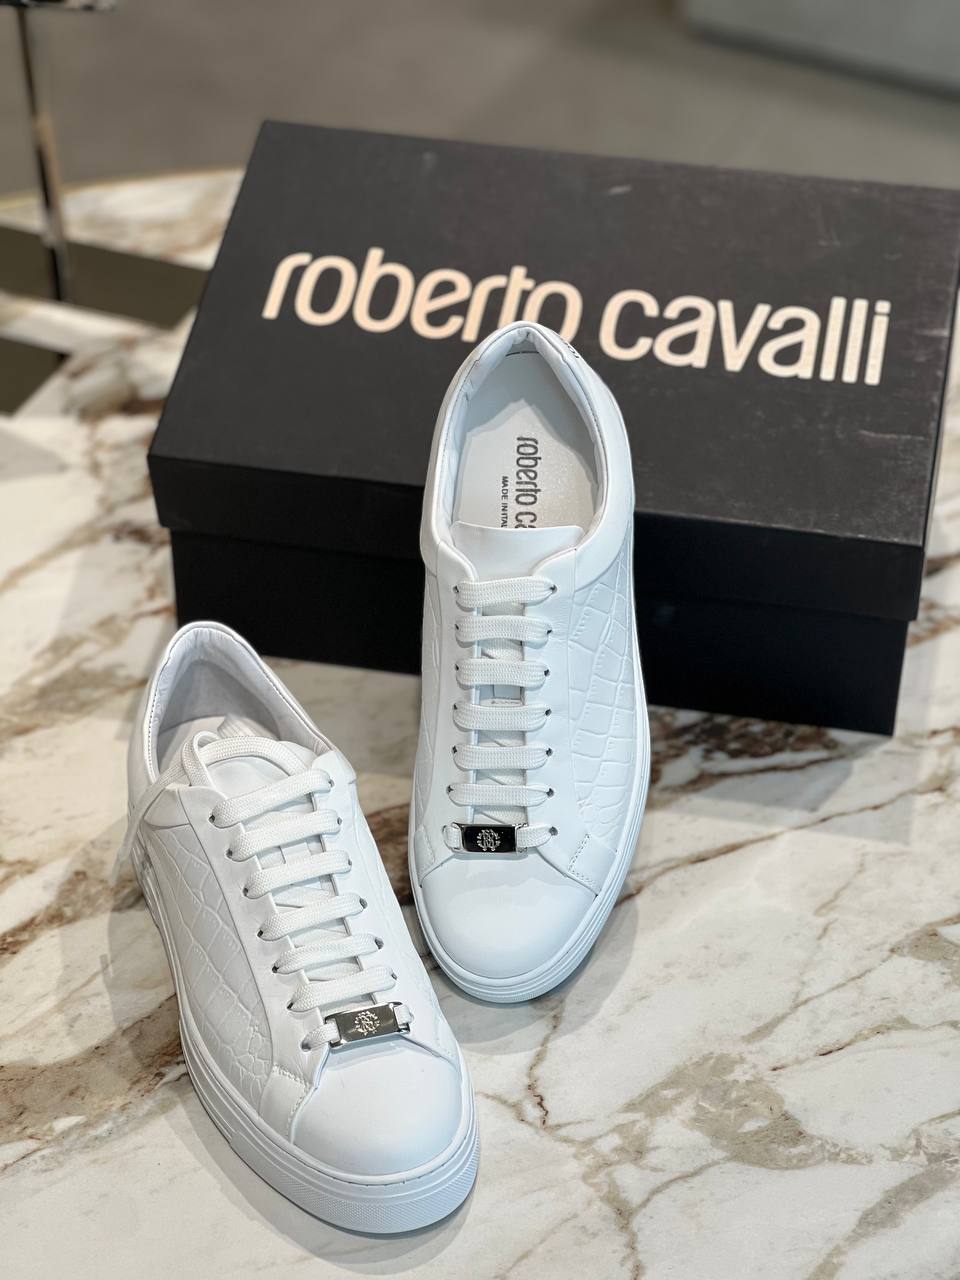 Roberto Cavalli Outlets 5942